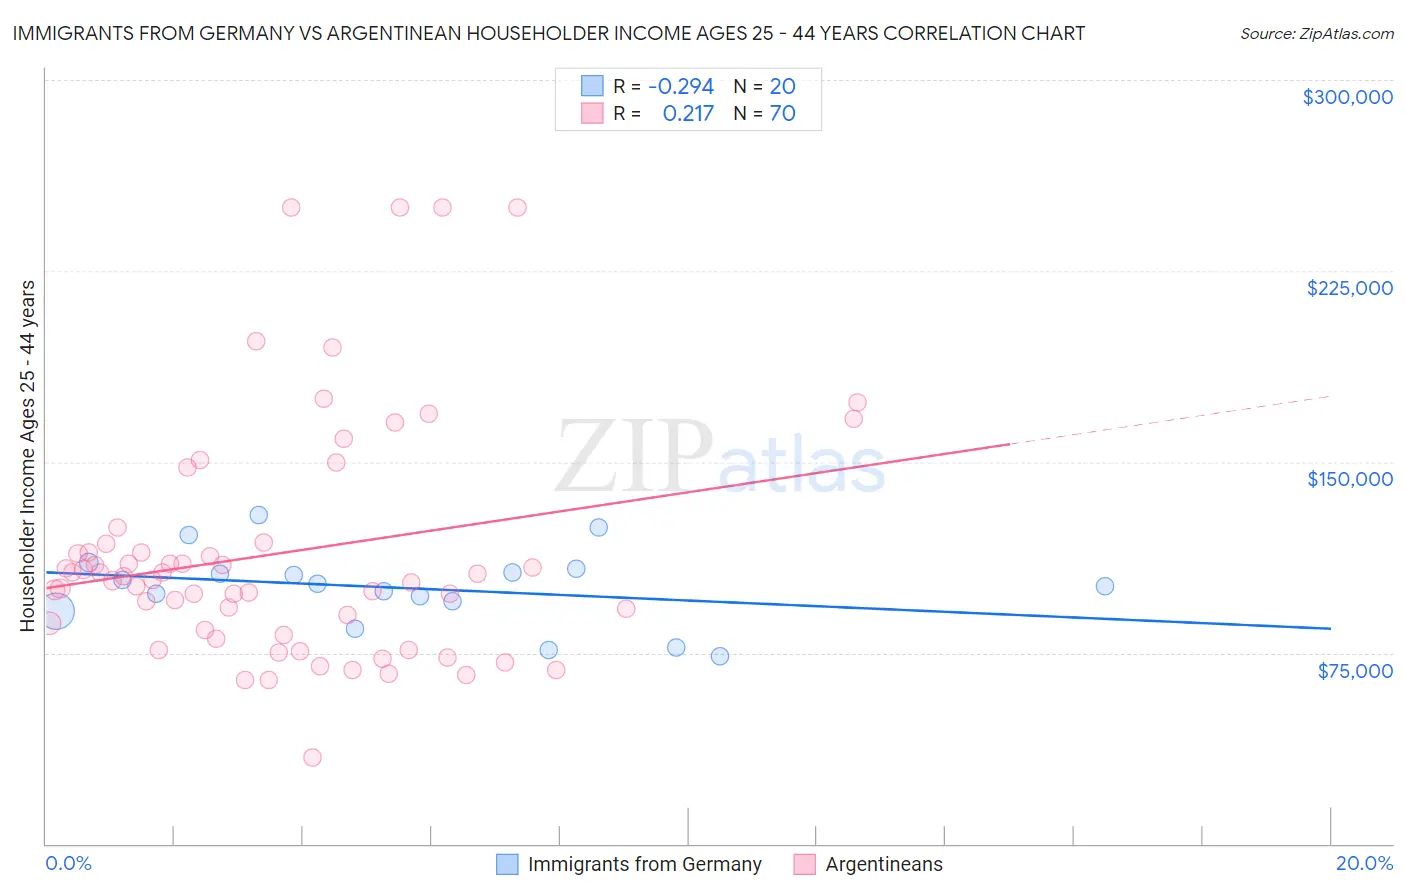 Immigrants from Germany vs Argentinean Householder Income Ages 25 - 44 years